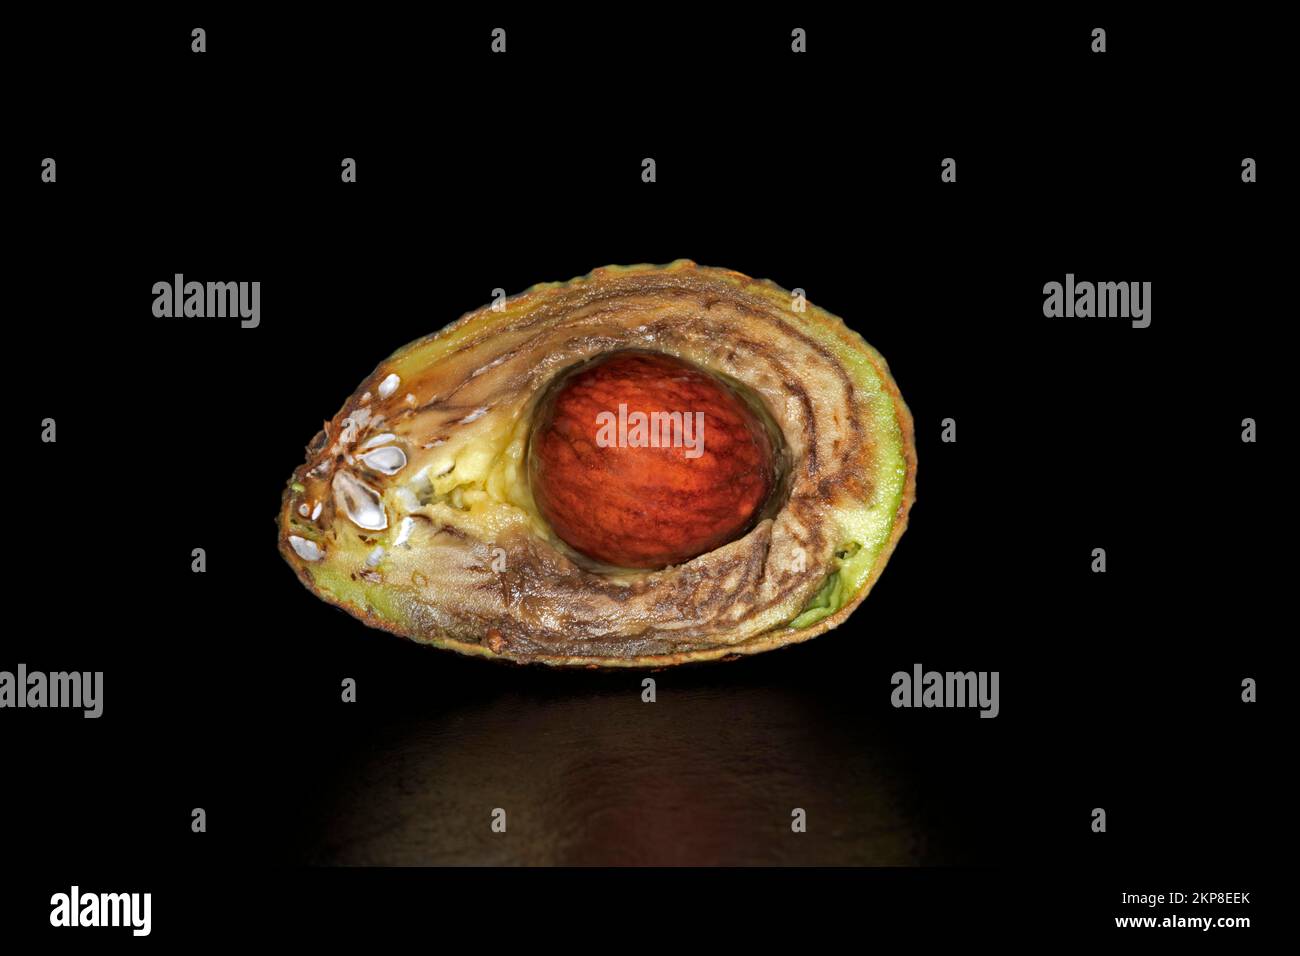 Symbol photo transience, halved overripe avocado (Persea americana Mill.) with pit, food photo with black background Stock Photo